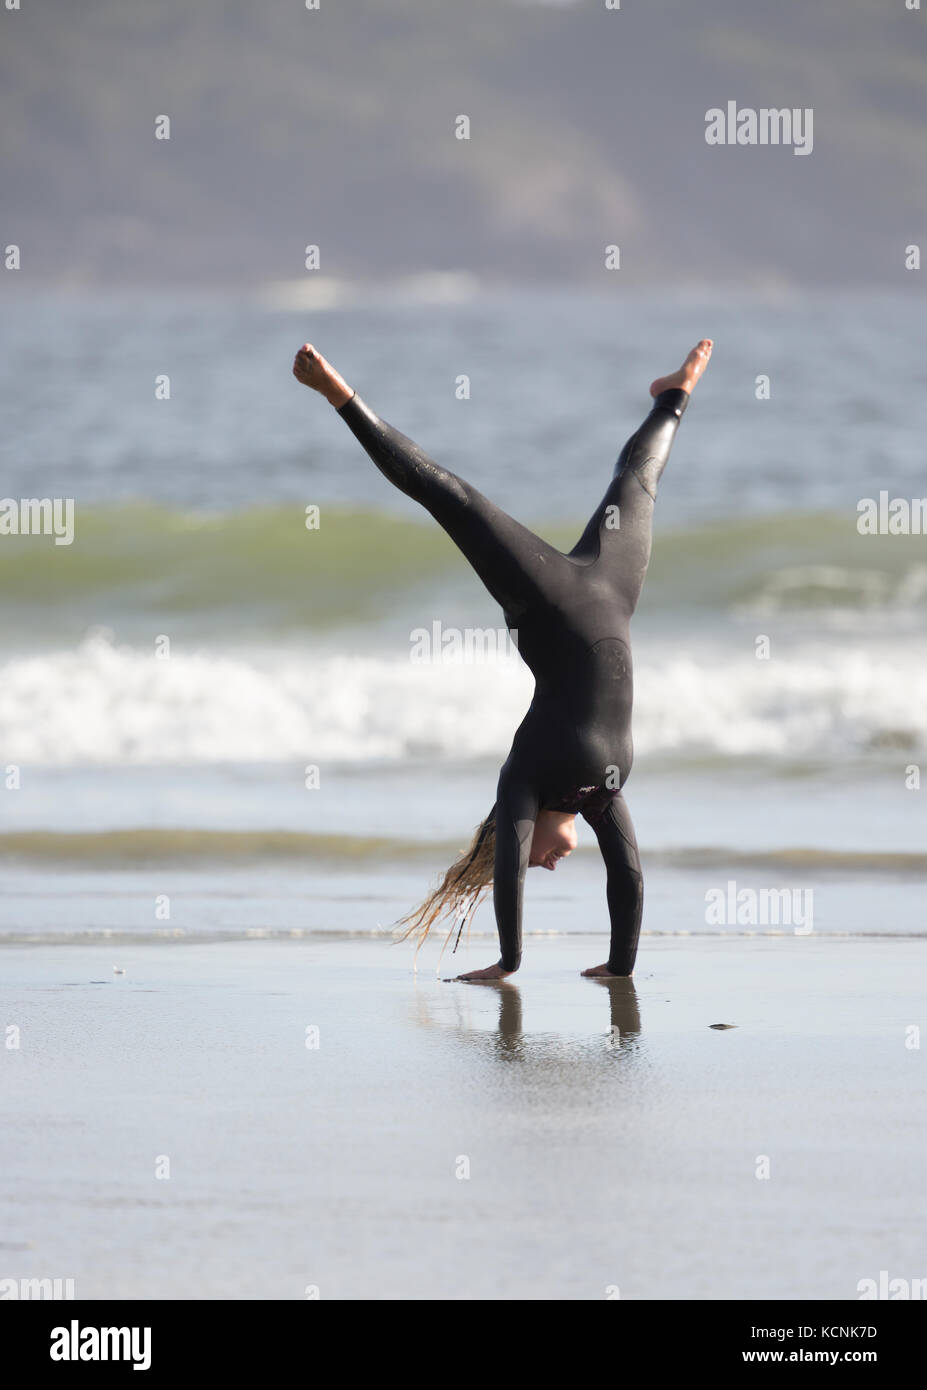 A female surfer shows off her gymnastic skills while on Chesterman Beach, Tofino, Vancouver Island, British Columbia, Canada Stock Photo